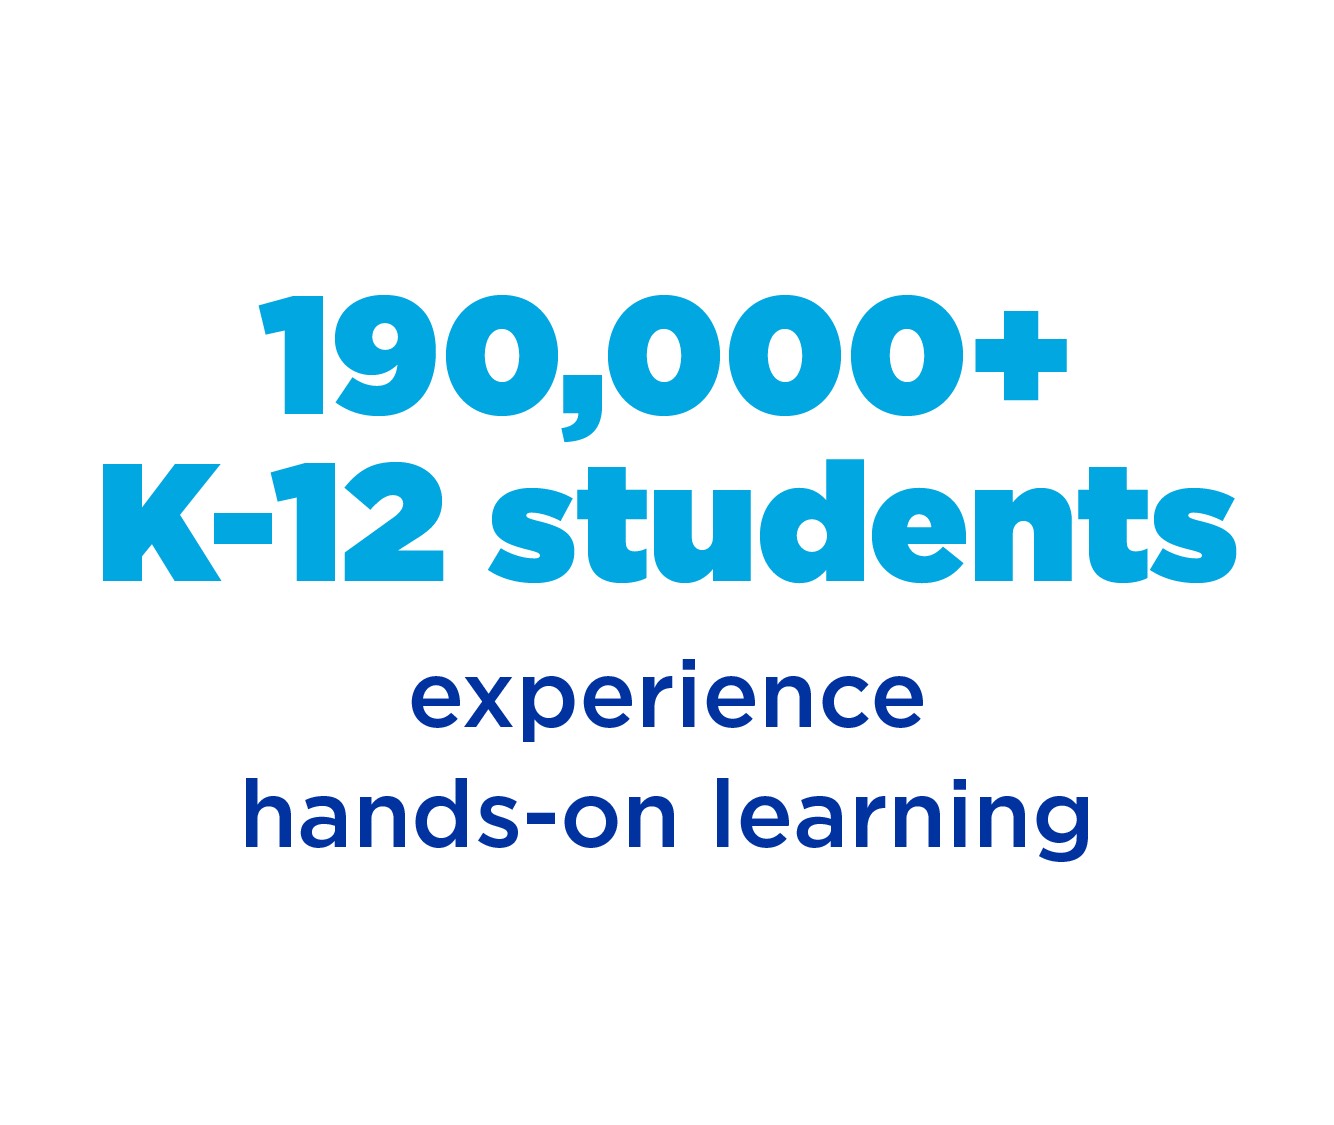 190,00 k-12 students experience hands-on learning